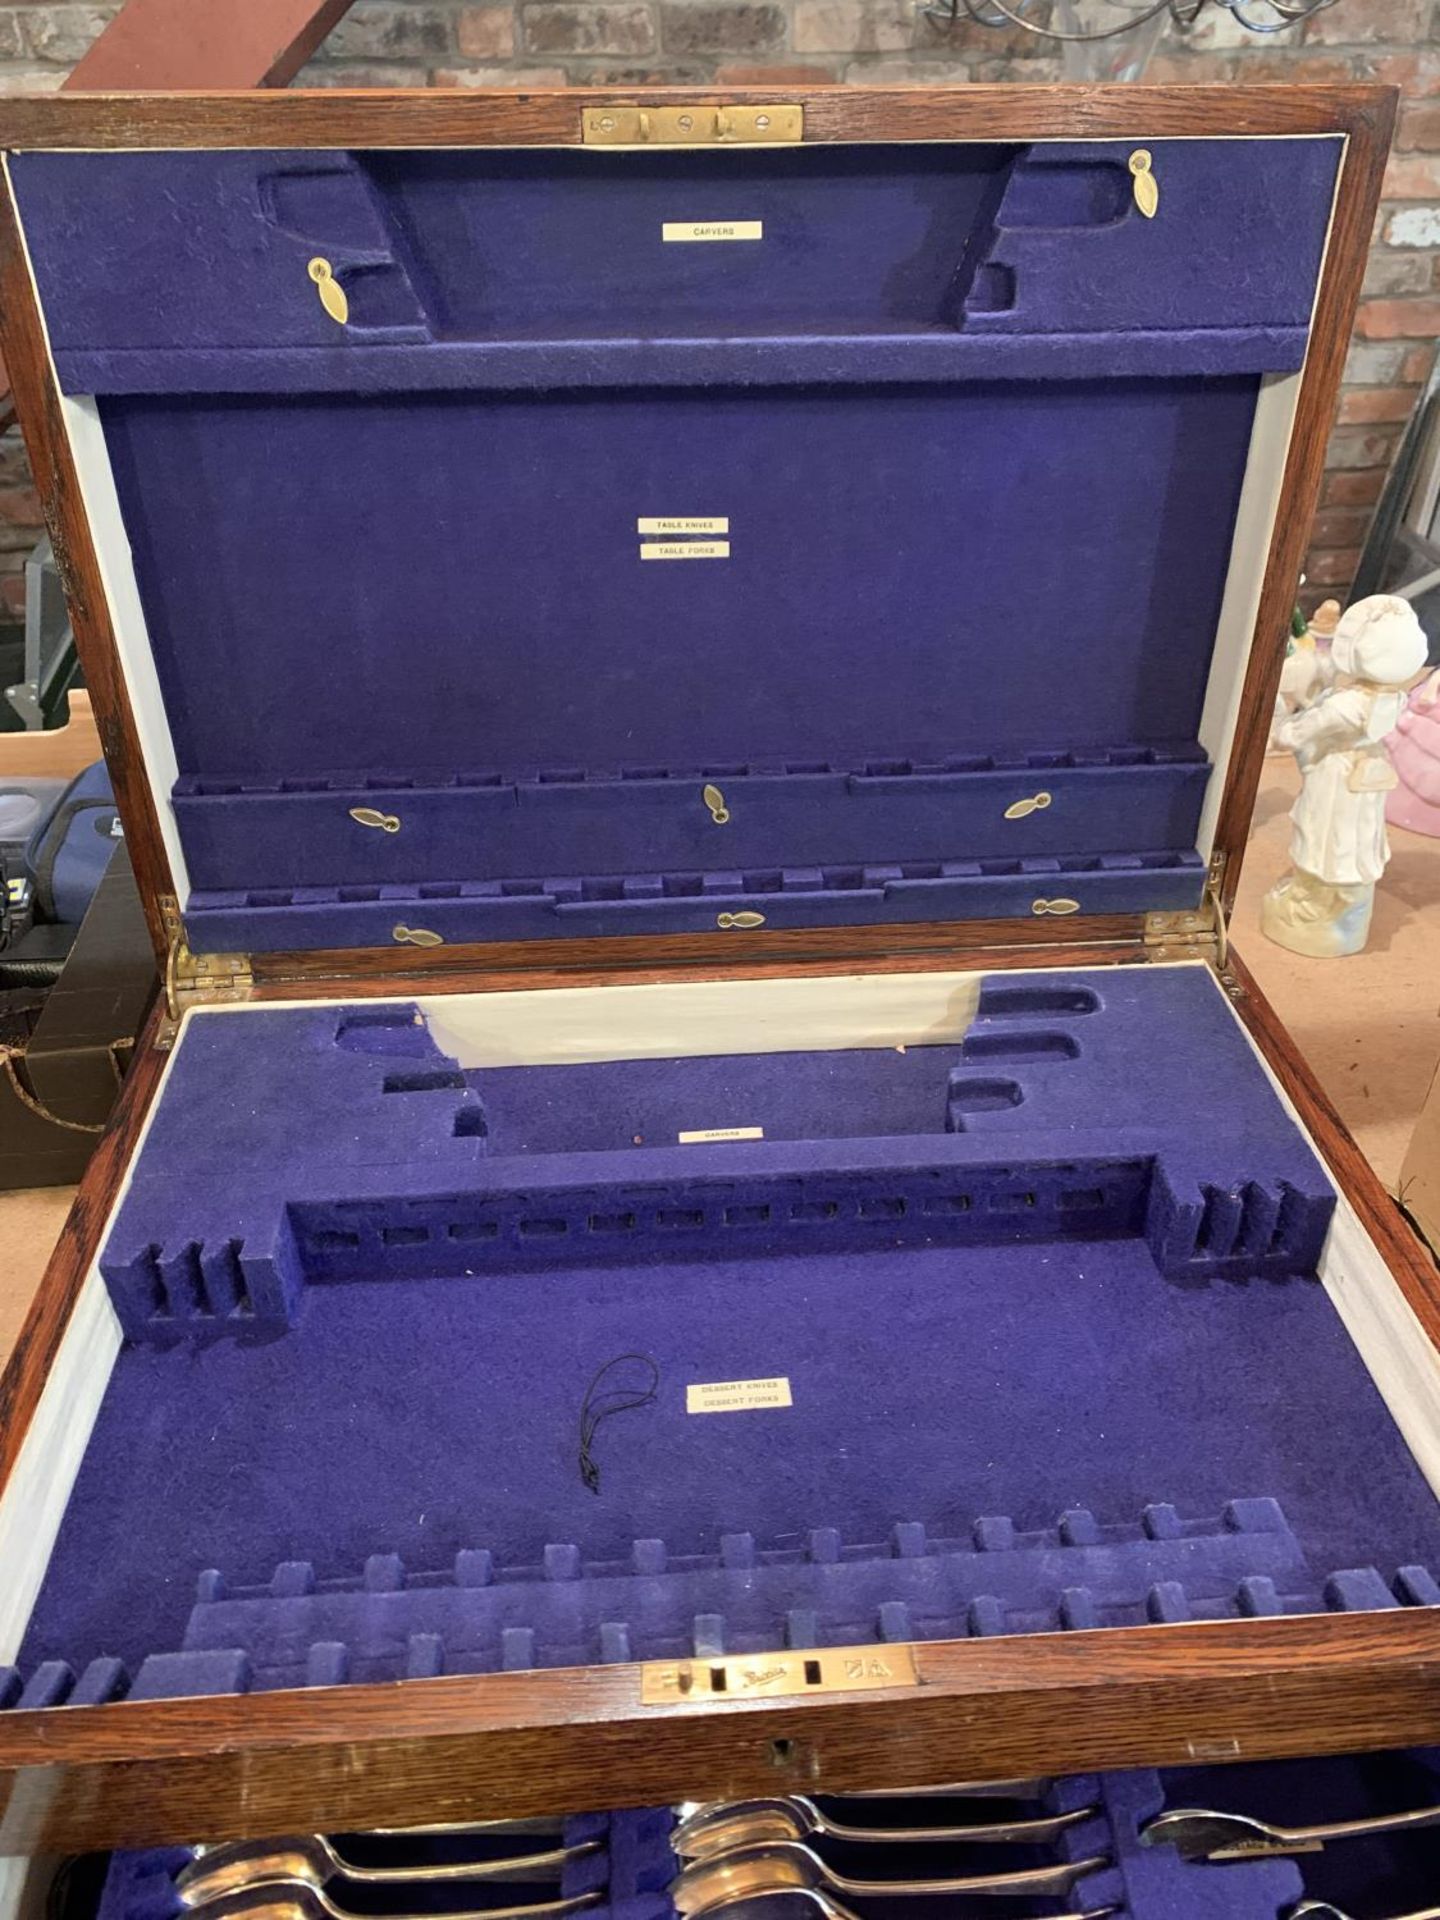 A LARGE OAK CUTLERY DISPLAY BOX WITH BRASS INLAY AND A BLUE FELT INTERIOR - Image 5 of 5